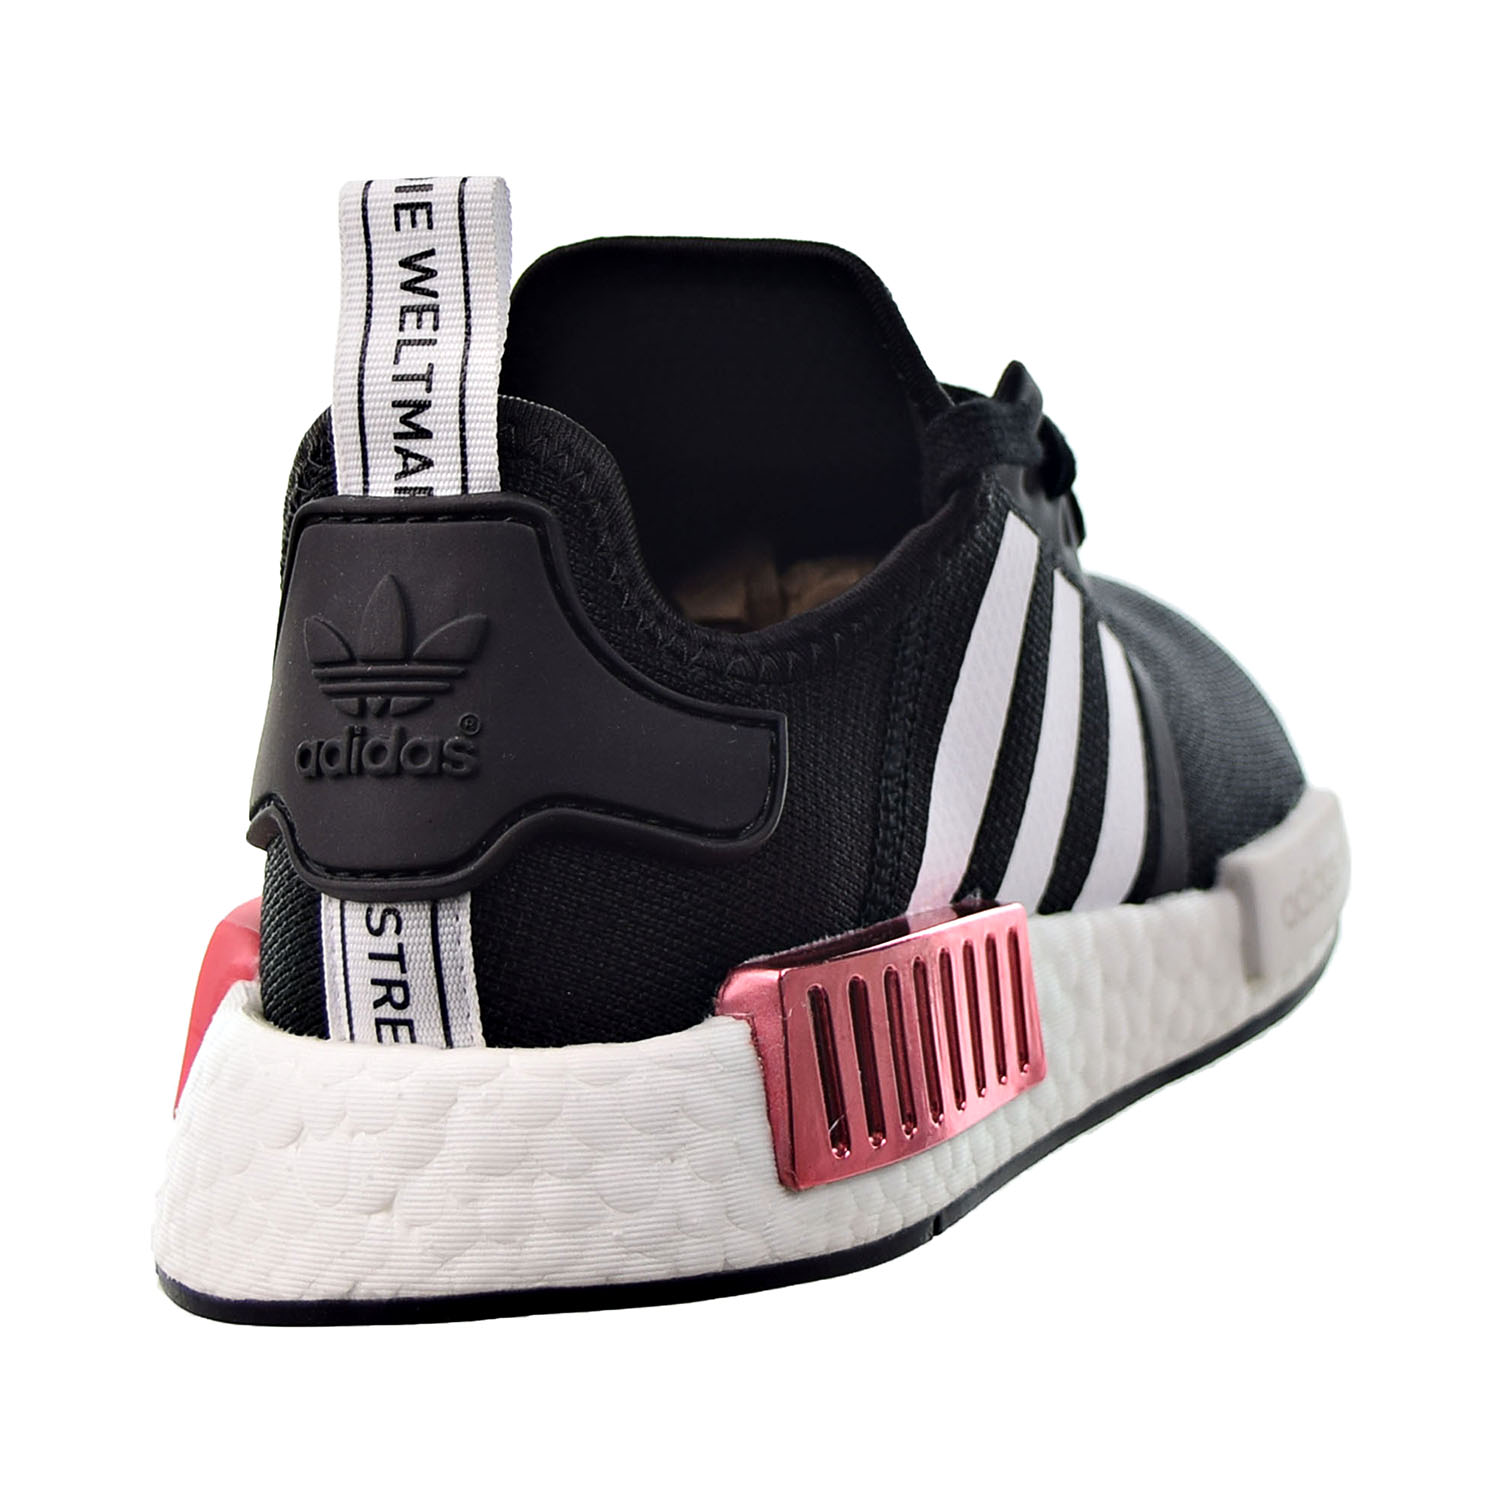 In detail Related Personally Adidas NMD R1 Women's Shoes Black-White-Pink fy3771